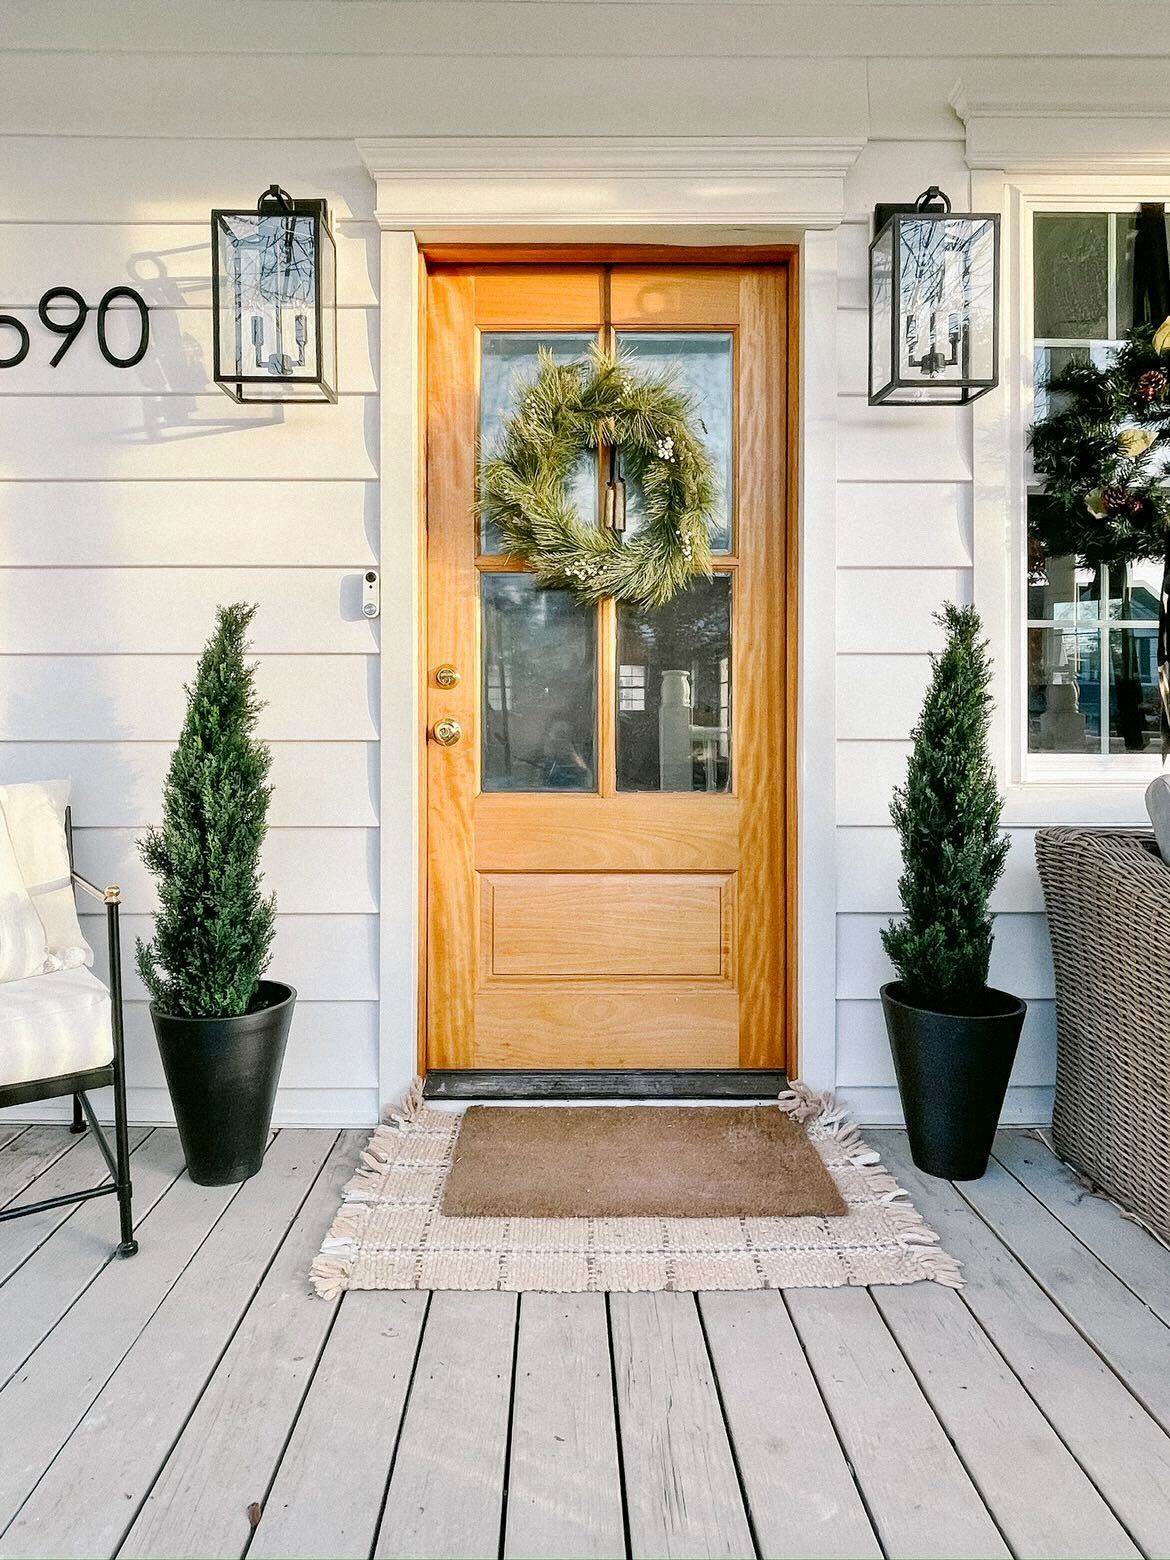 A warm front porch with a wooden door, green wreath, and plants accenting the entryway.